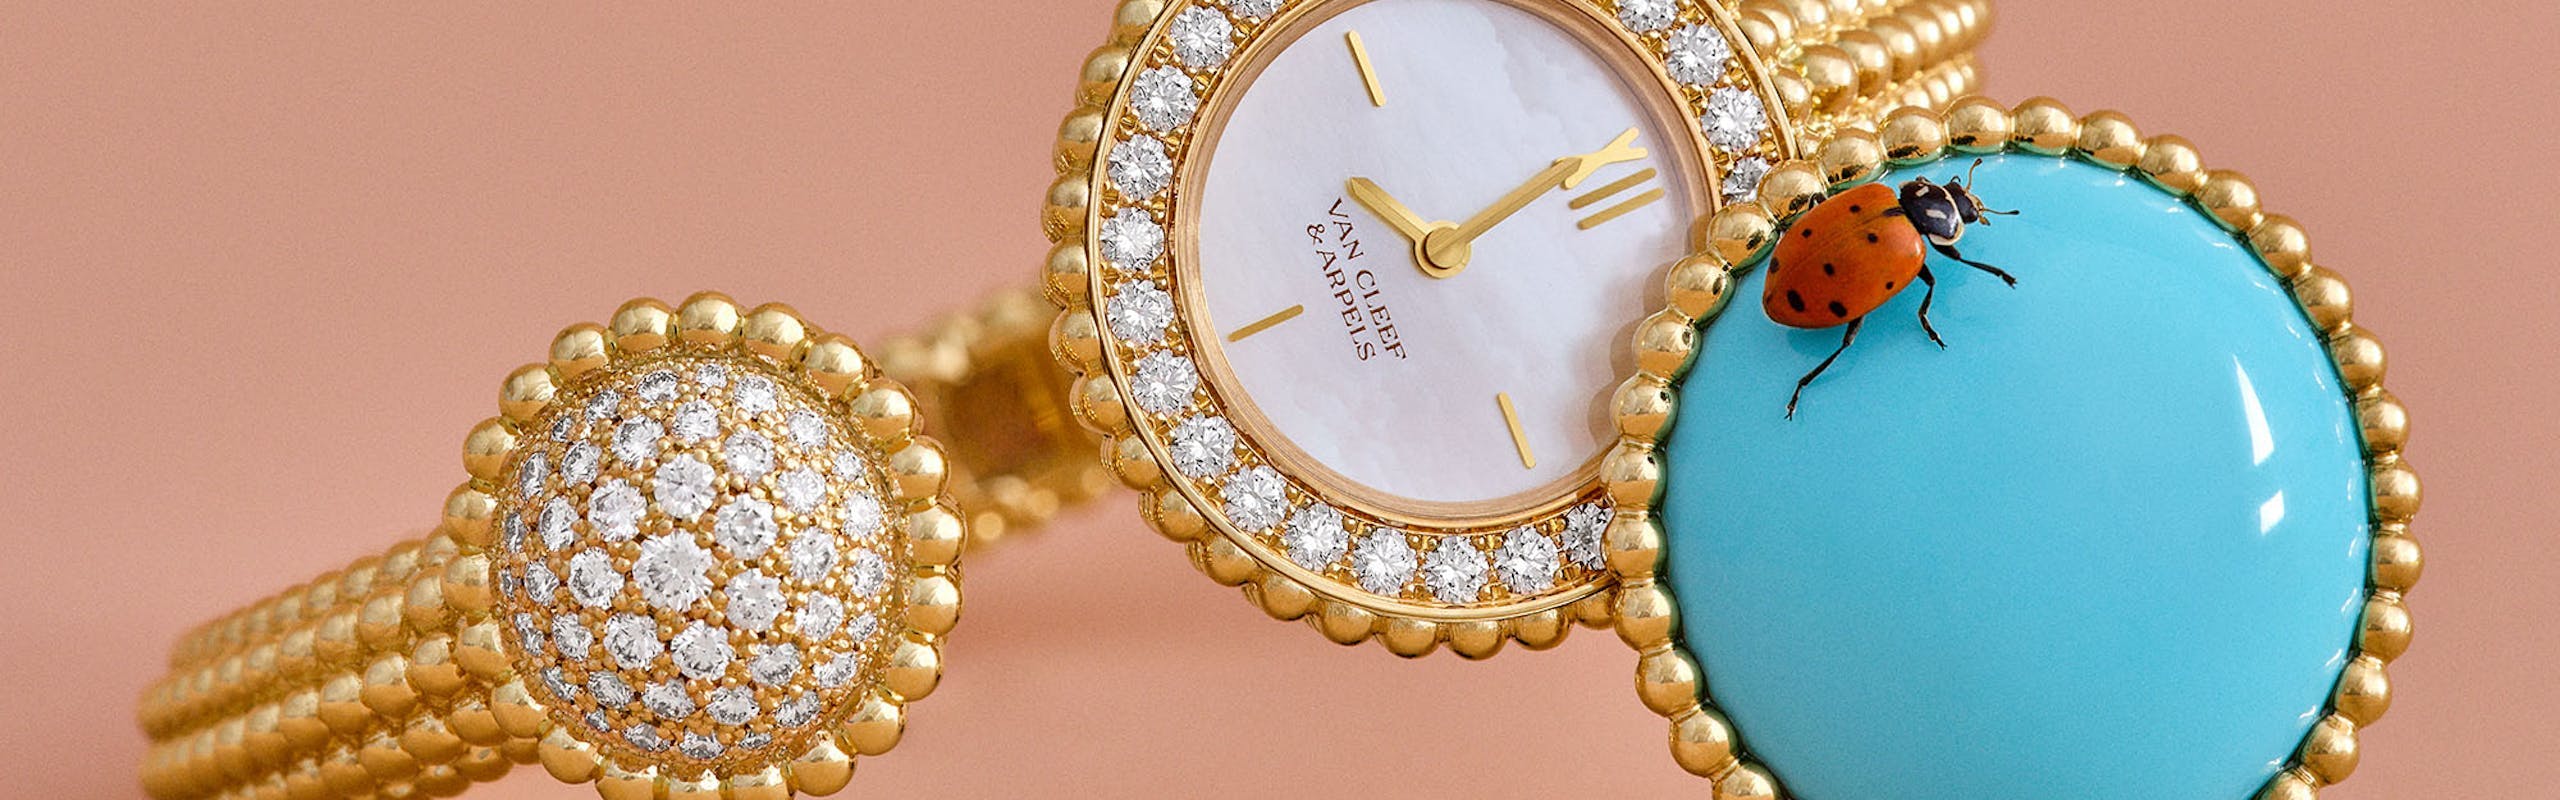 van cleef watch with gold beading and a turquoise watch face cover